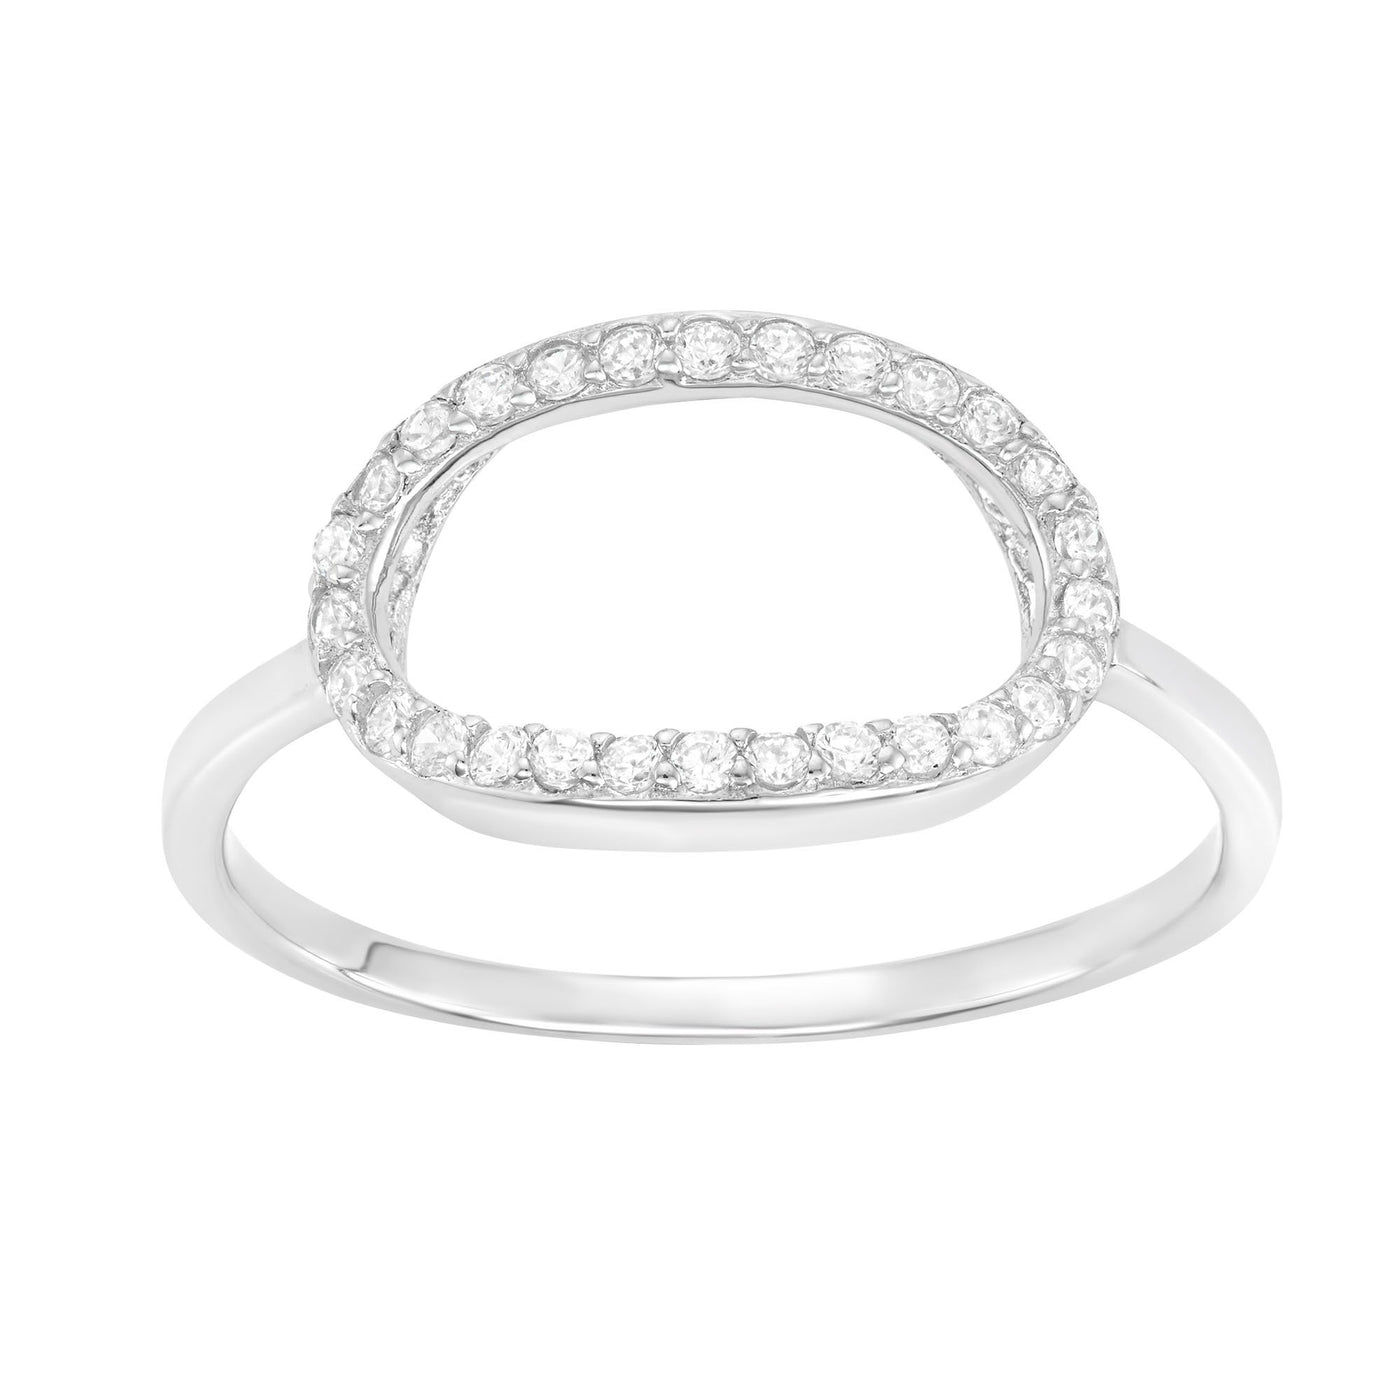 Sterling Silver Open Oval Ring With CZ Stones